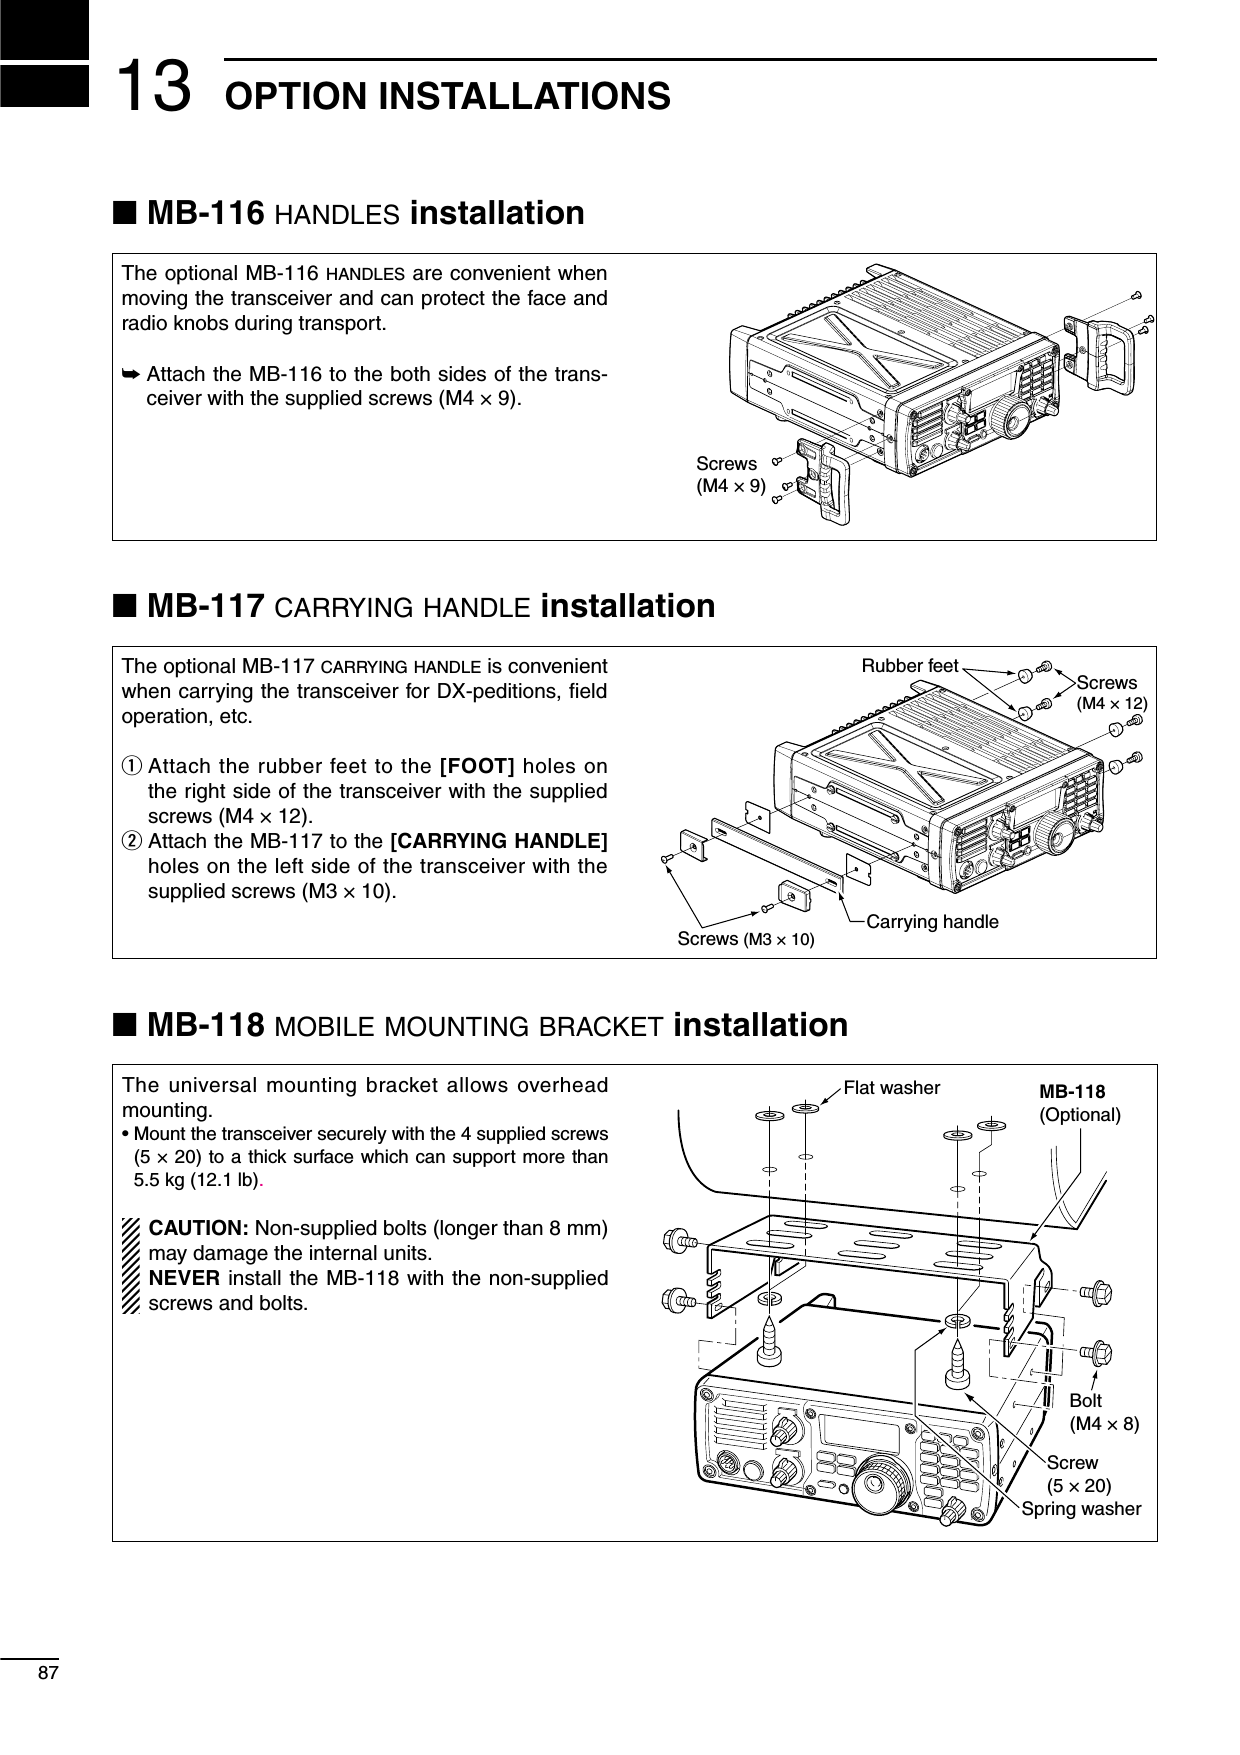 1387OPTION INSTALLATIONSN MB-116 HANDLES installationThe optional MB-116 HANDLES are convenient when moving the transceiver and can protect the face and radio knobs during transport.±  Attach the MB-116 to the both sides of the trans-ceiver with the supplied screws (M4 × 9).Screws(M4 × 9)N MB-117 CARRYING HANDLE installationThe optional MB-117 CARRYING HANDLE is convenient when carrying the transceiver for DX-peditions, ﬁeld operation, etc.q  Attach the rubber feet to the [FOOT] holes on the right side of the transceiver with the supplied screws (M4 × 12).w  Attach the MB-117 to the [CARRYING HANDLE] holes on the left side of the transceiver with the supplied screws (M3 × 10).Rubber feetCarrying handleScrews(M4 × 12)Screws (M3 × 10)N MB-118 MOBILE MOUNTING BRACKET installationThe universal mounting bracket allows overhead mounting.•  Mount the transceiver securely with the 4 supplied screws (5 × 20) to a thick surface which can support more than 5.5 kg (12.1 lb). CAUTION: Non-supplied bolts (longer than 8 mm) may damage the internal units.  NEVER install the MB-118 with the non-supplied screws and bolts.MB-118(Optional)Flat washerBolt(M4 × 8)Screw(5 × 20)Spring washer